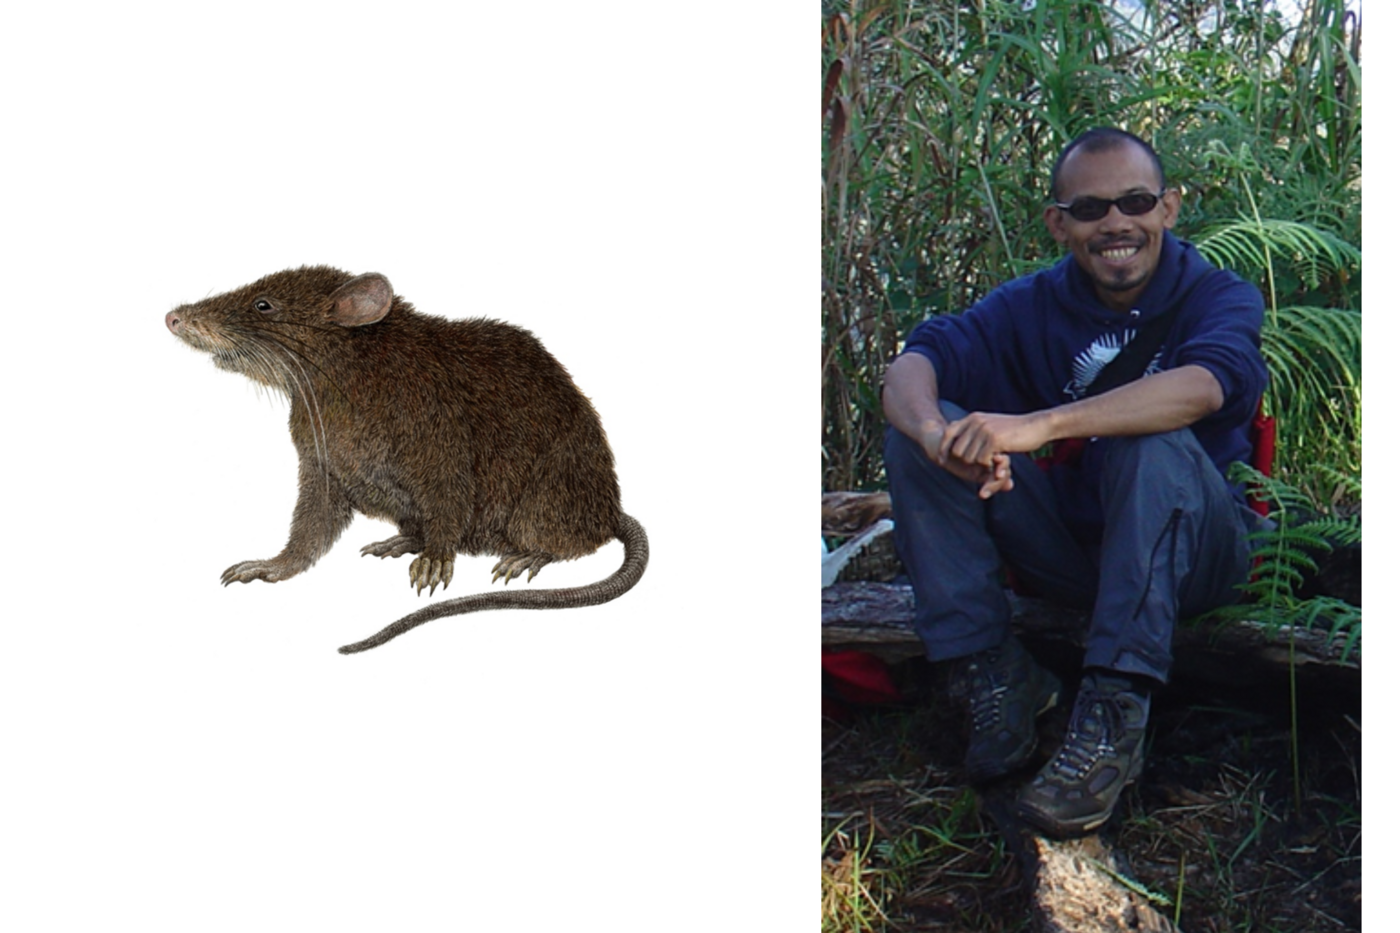 A two image panel, left, is an illustration of a brown mouse on a white background. Right is a photograph of a man wearing seated on a log in a forest, with green plants behind him. He is wearing blue jeans, a blue hoodie and sunglasses.